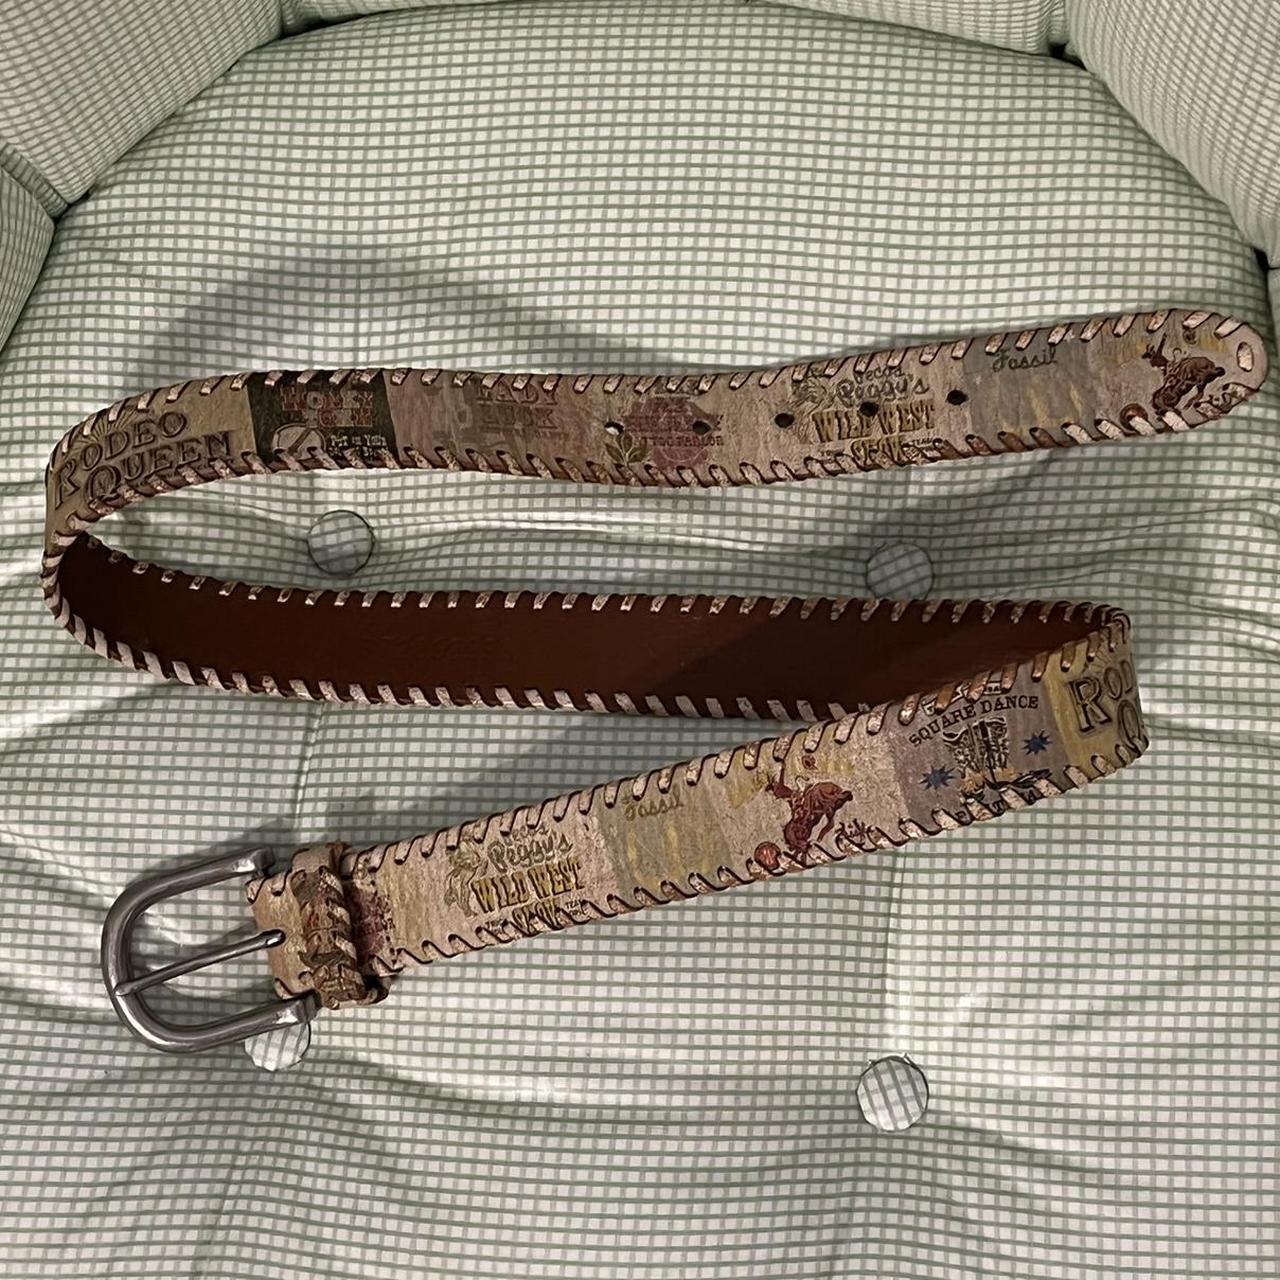 Fossil Women's Brown and Tan Belt